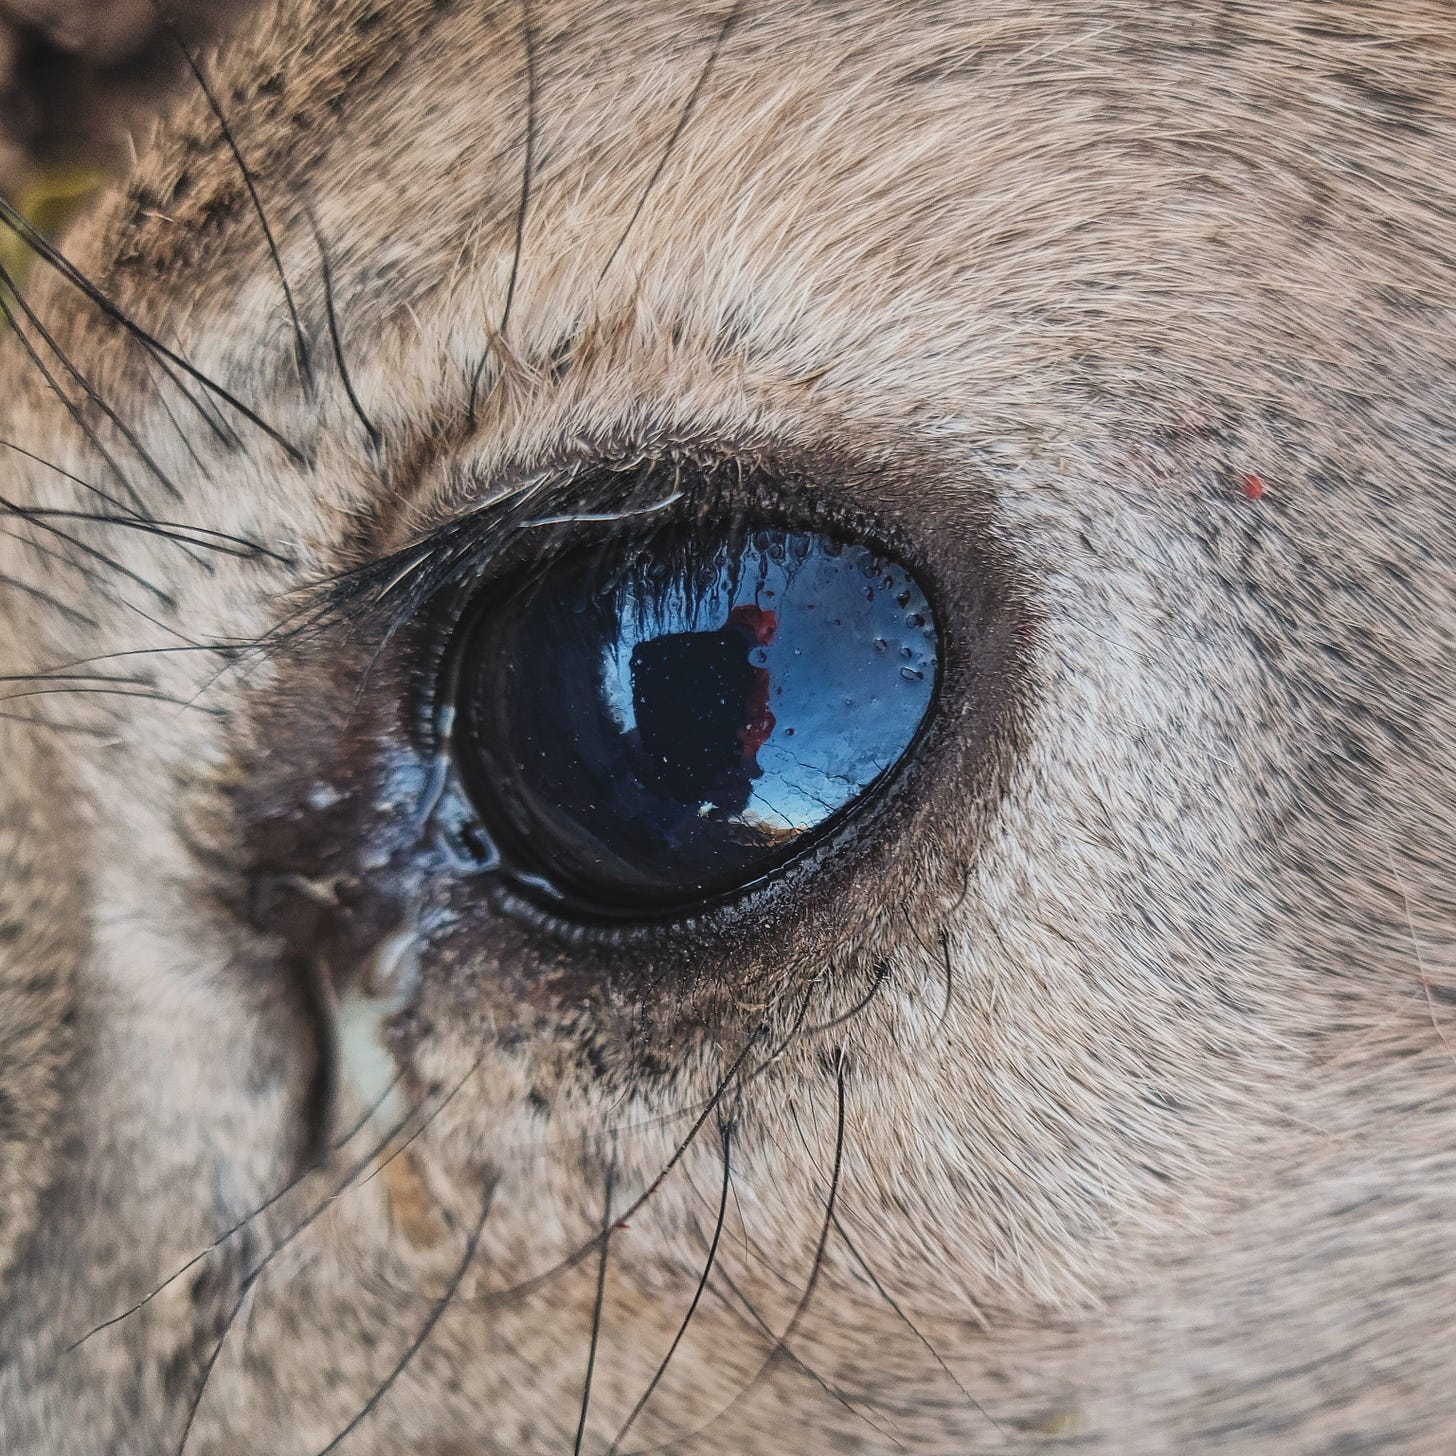 My reflection in the eye of a deer. 